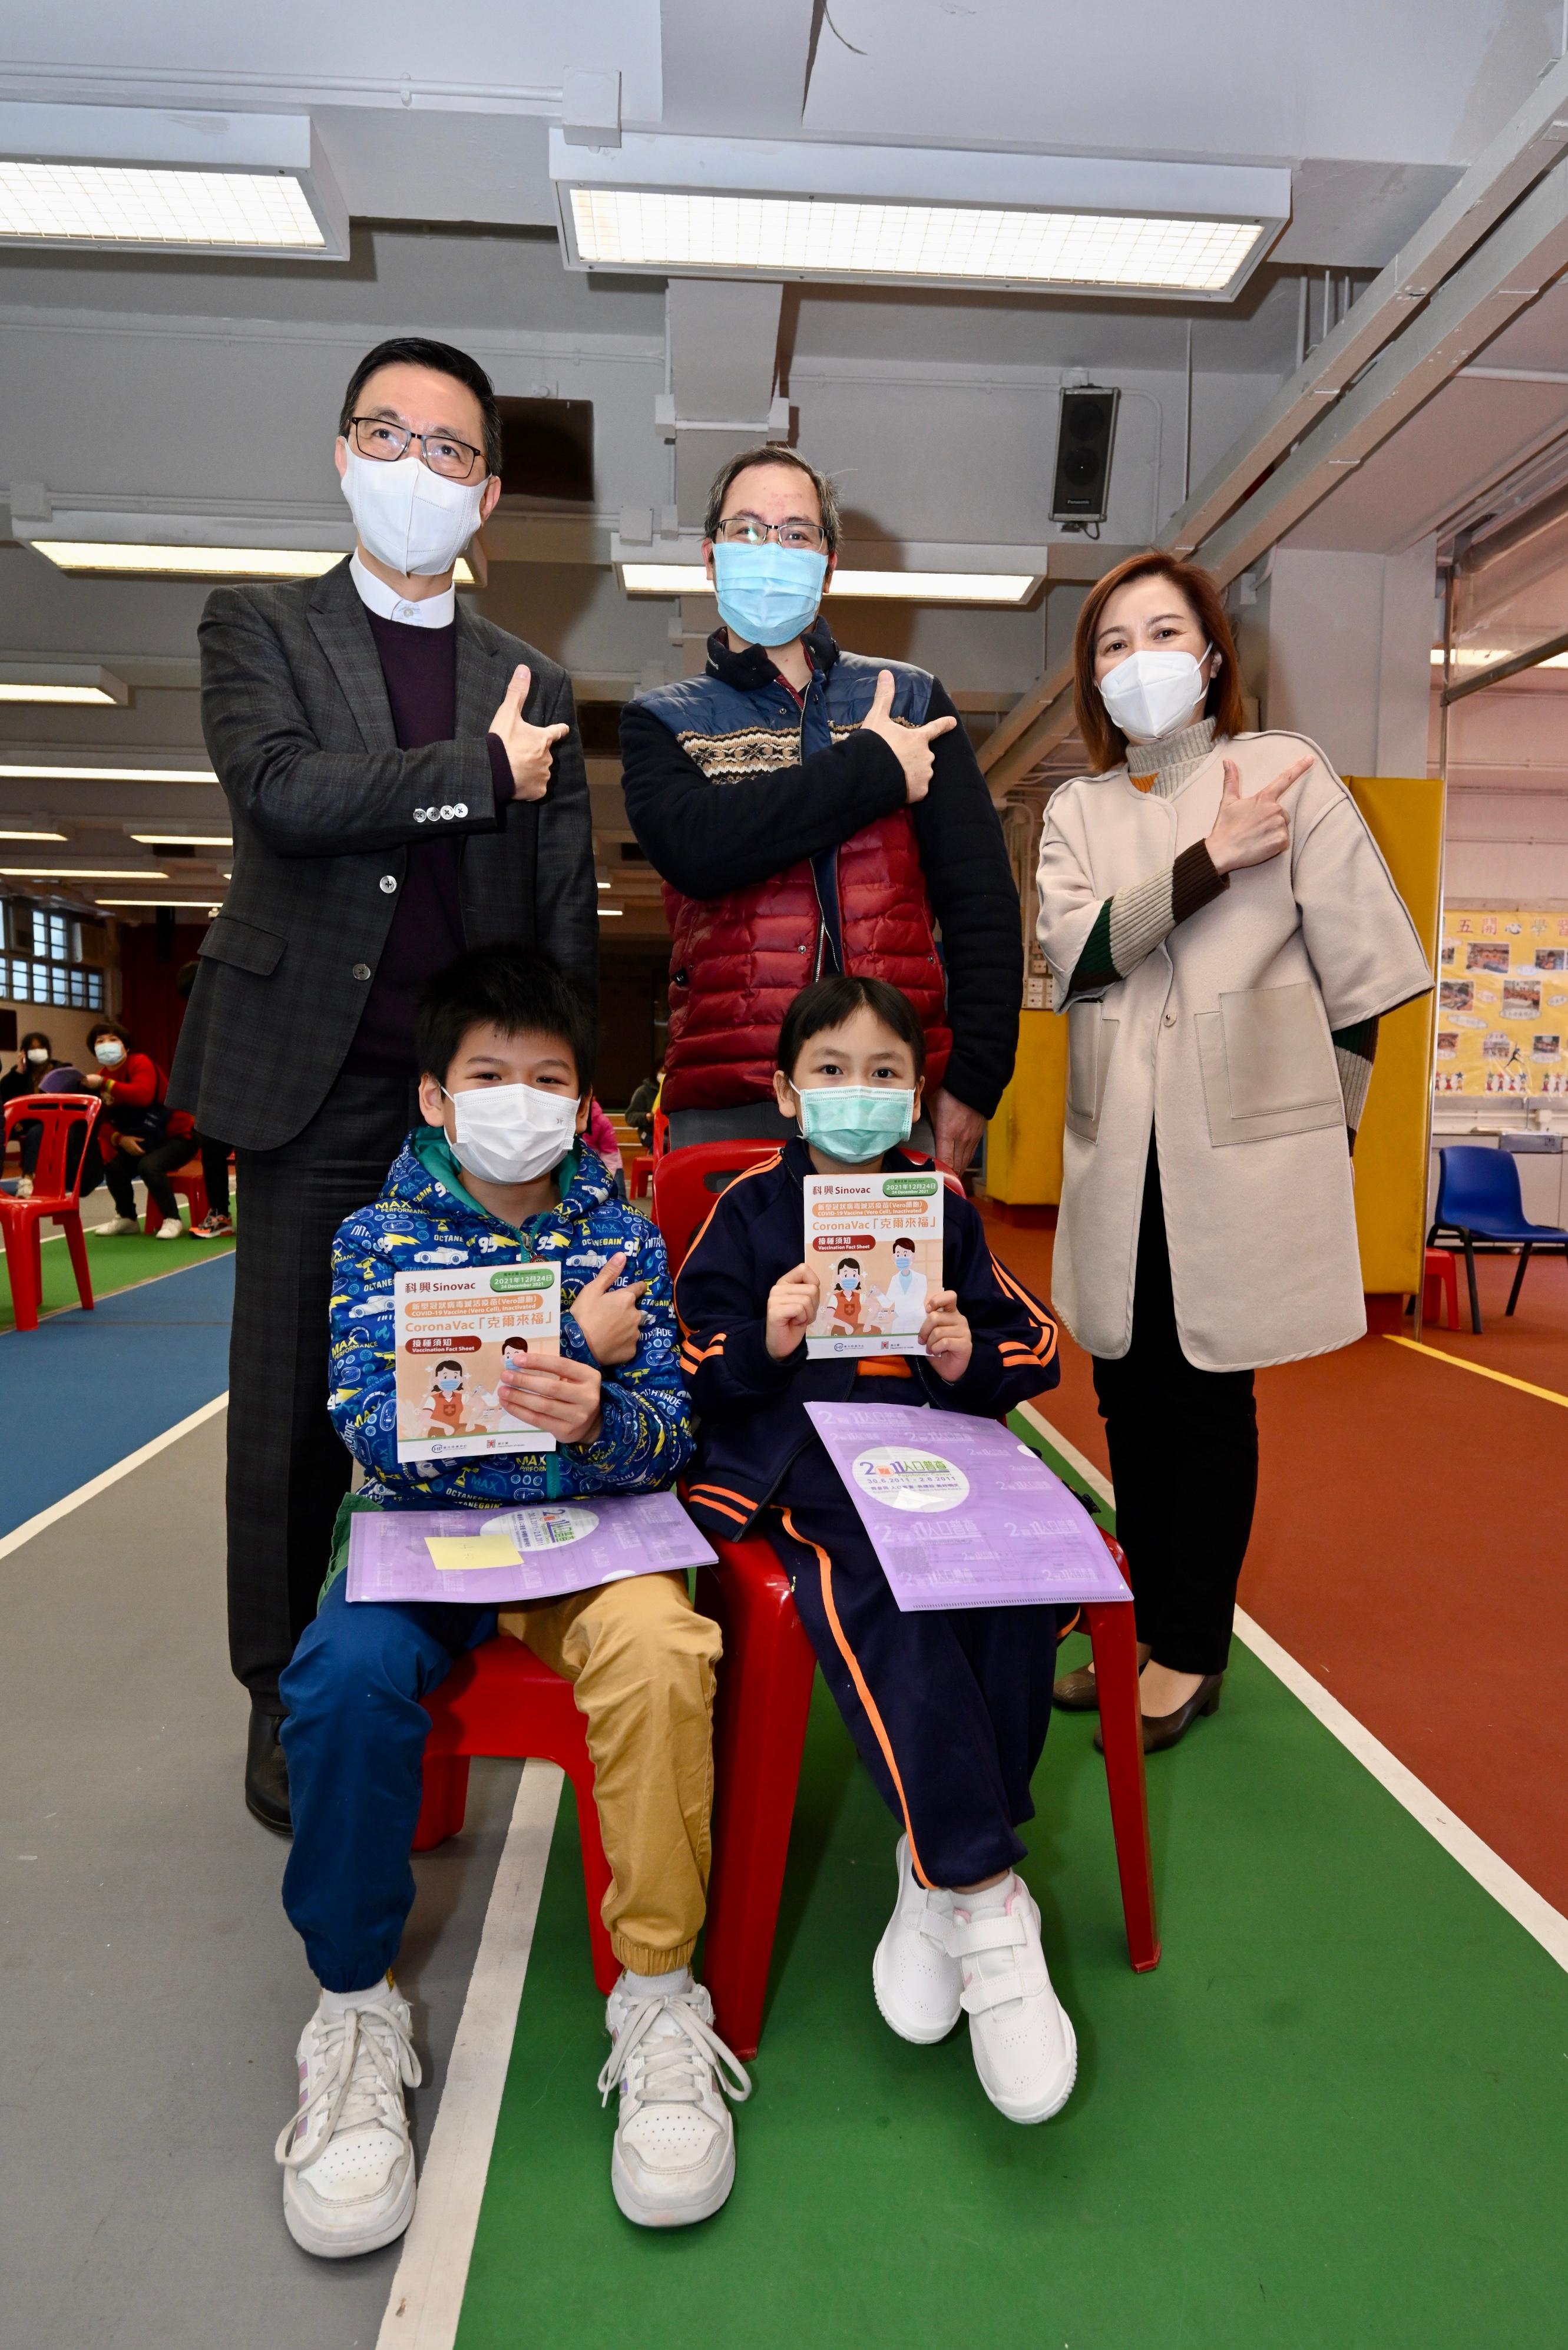 The Secretary for Education, Mr Kevin Yeung, visited Shau Kei Wan Government Primary School today (February 25) to inspect the implementation of the Vaccination Subsidy Scheme School Outreach. Picture shows Mr Yeung (back row, first left), together with the Headmistress, Ms Leung Ching-yee (back row, first right), a parent and students, appealing to students to receive vaccination as soon as possible.
